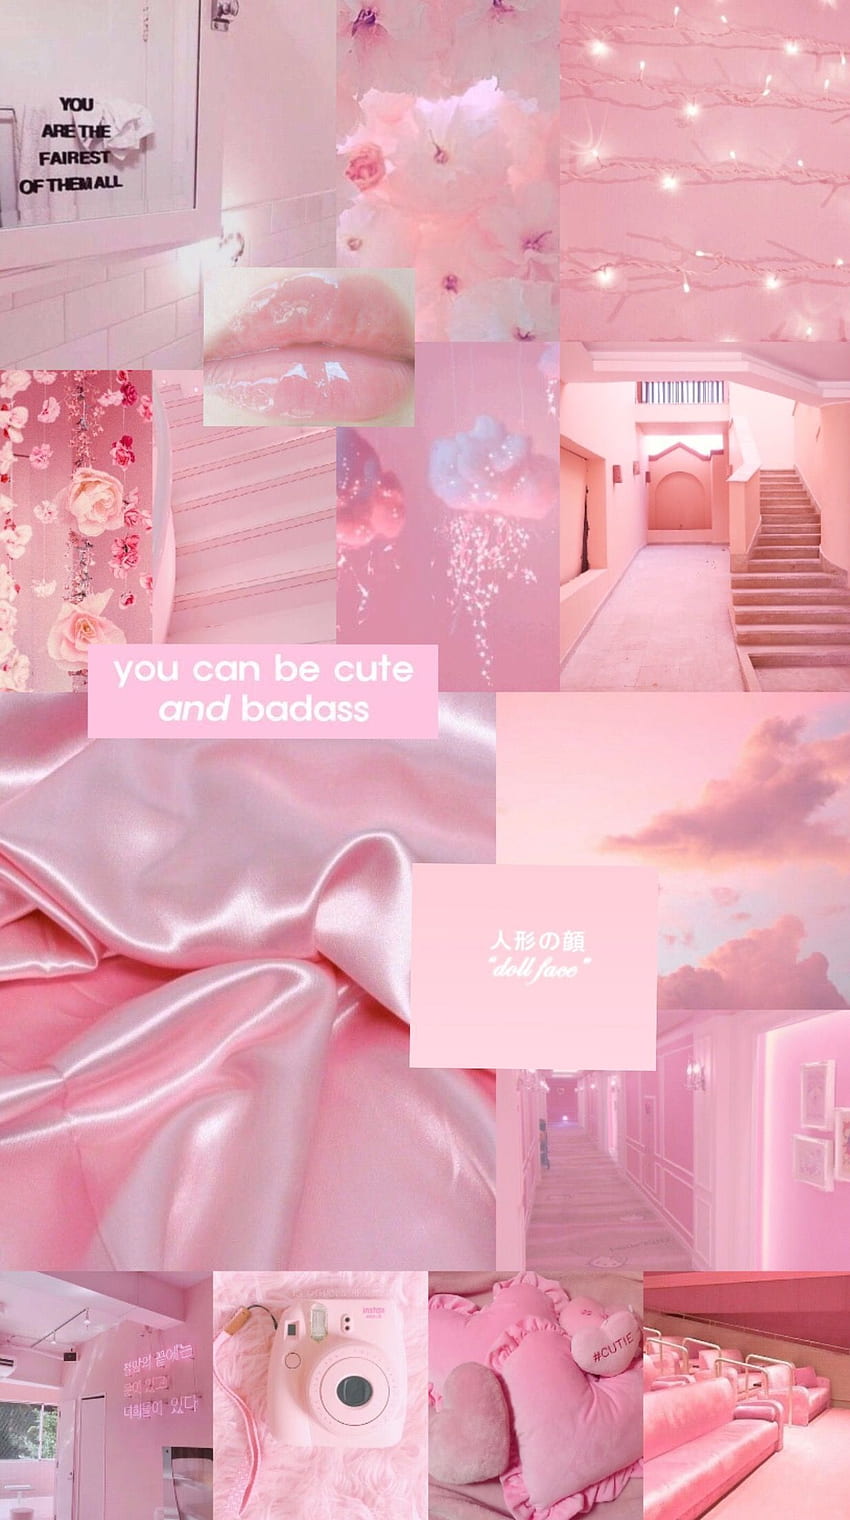 Get Latest Aesthetic for Android Phone 2019 by Uploaded by user in 2020. Pink girly, pink and blue, Pastel pink aesthetic HD phone wallpaper